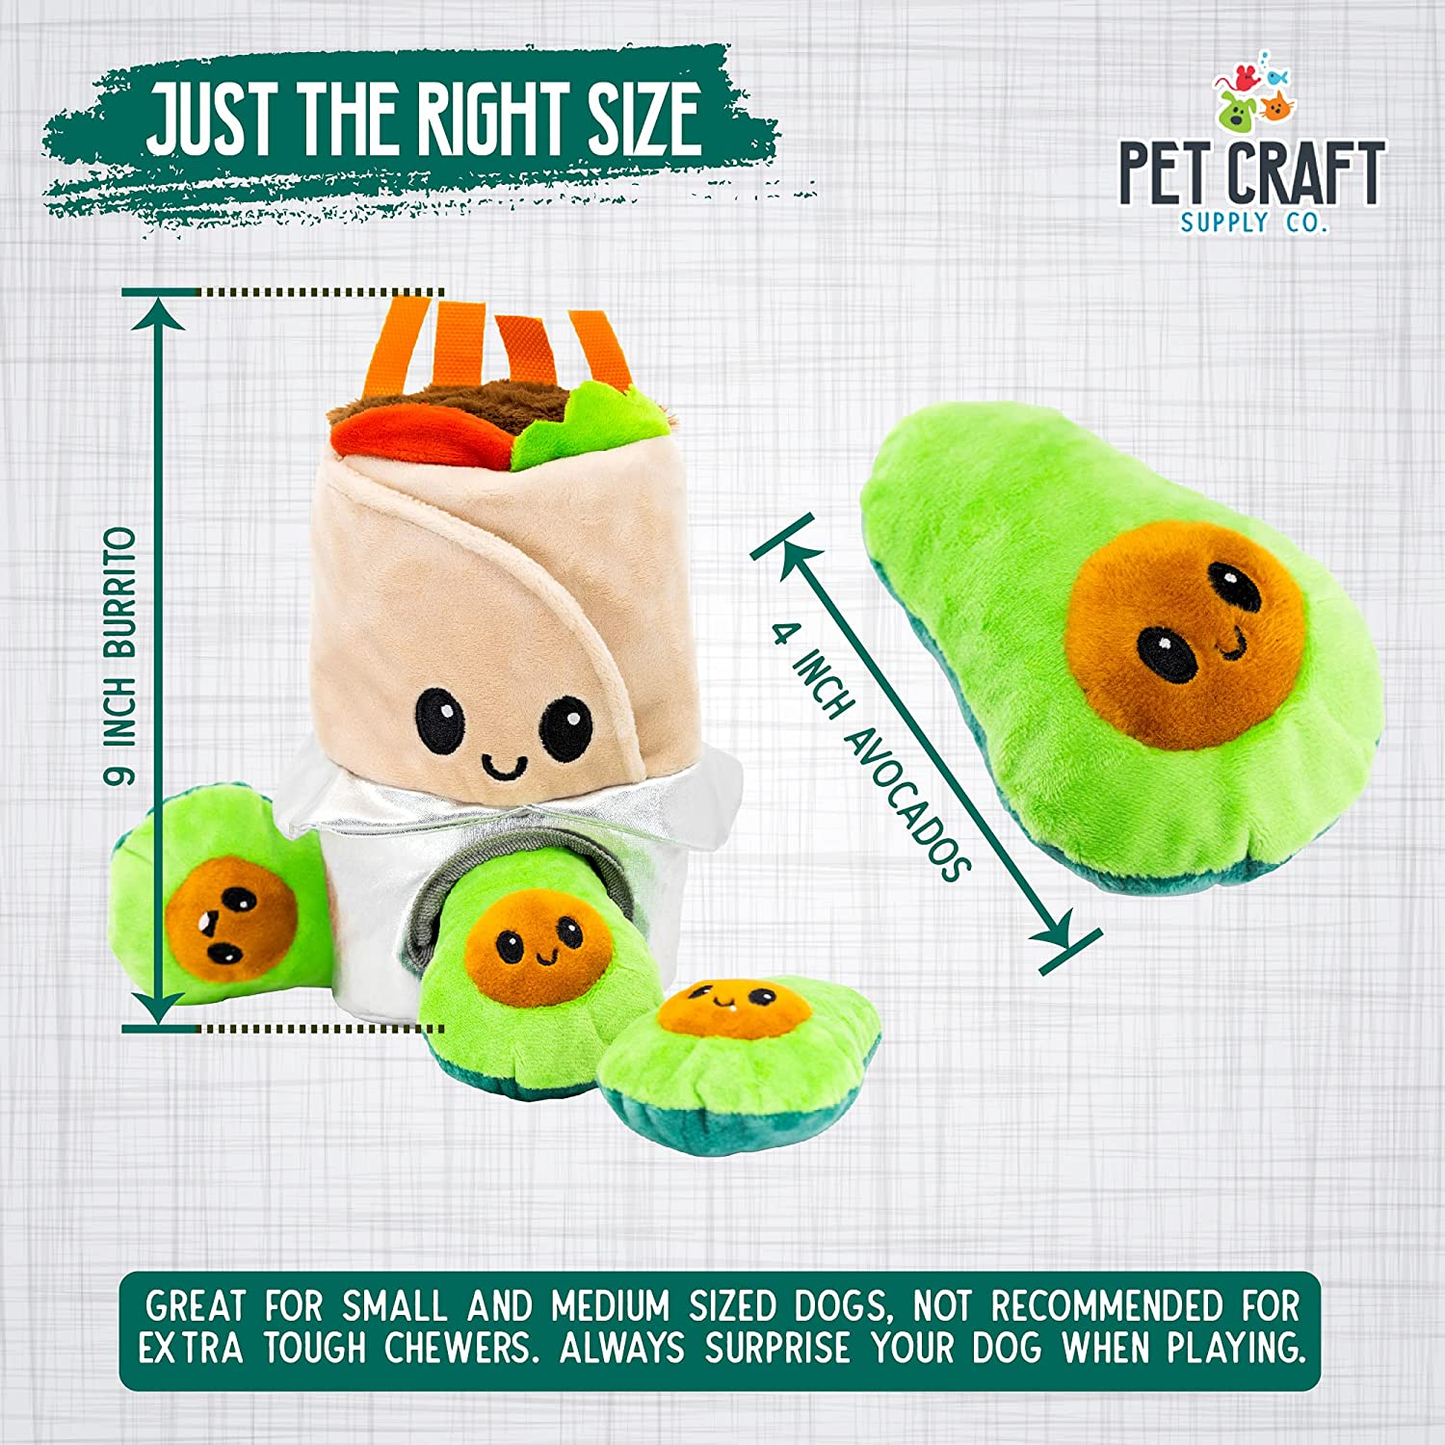 Pet Craft Supply Hide and Seek Plush Dog Toys Crinkle Squeaky Interactive Burrow Activity Puzzle Chew Fetch Treat Hiding Brain Stimulating Cute Funny Toy Bundle Pack - Burrito